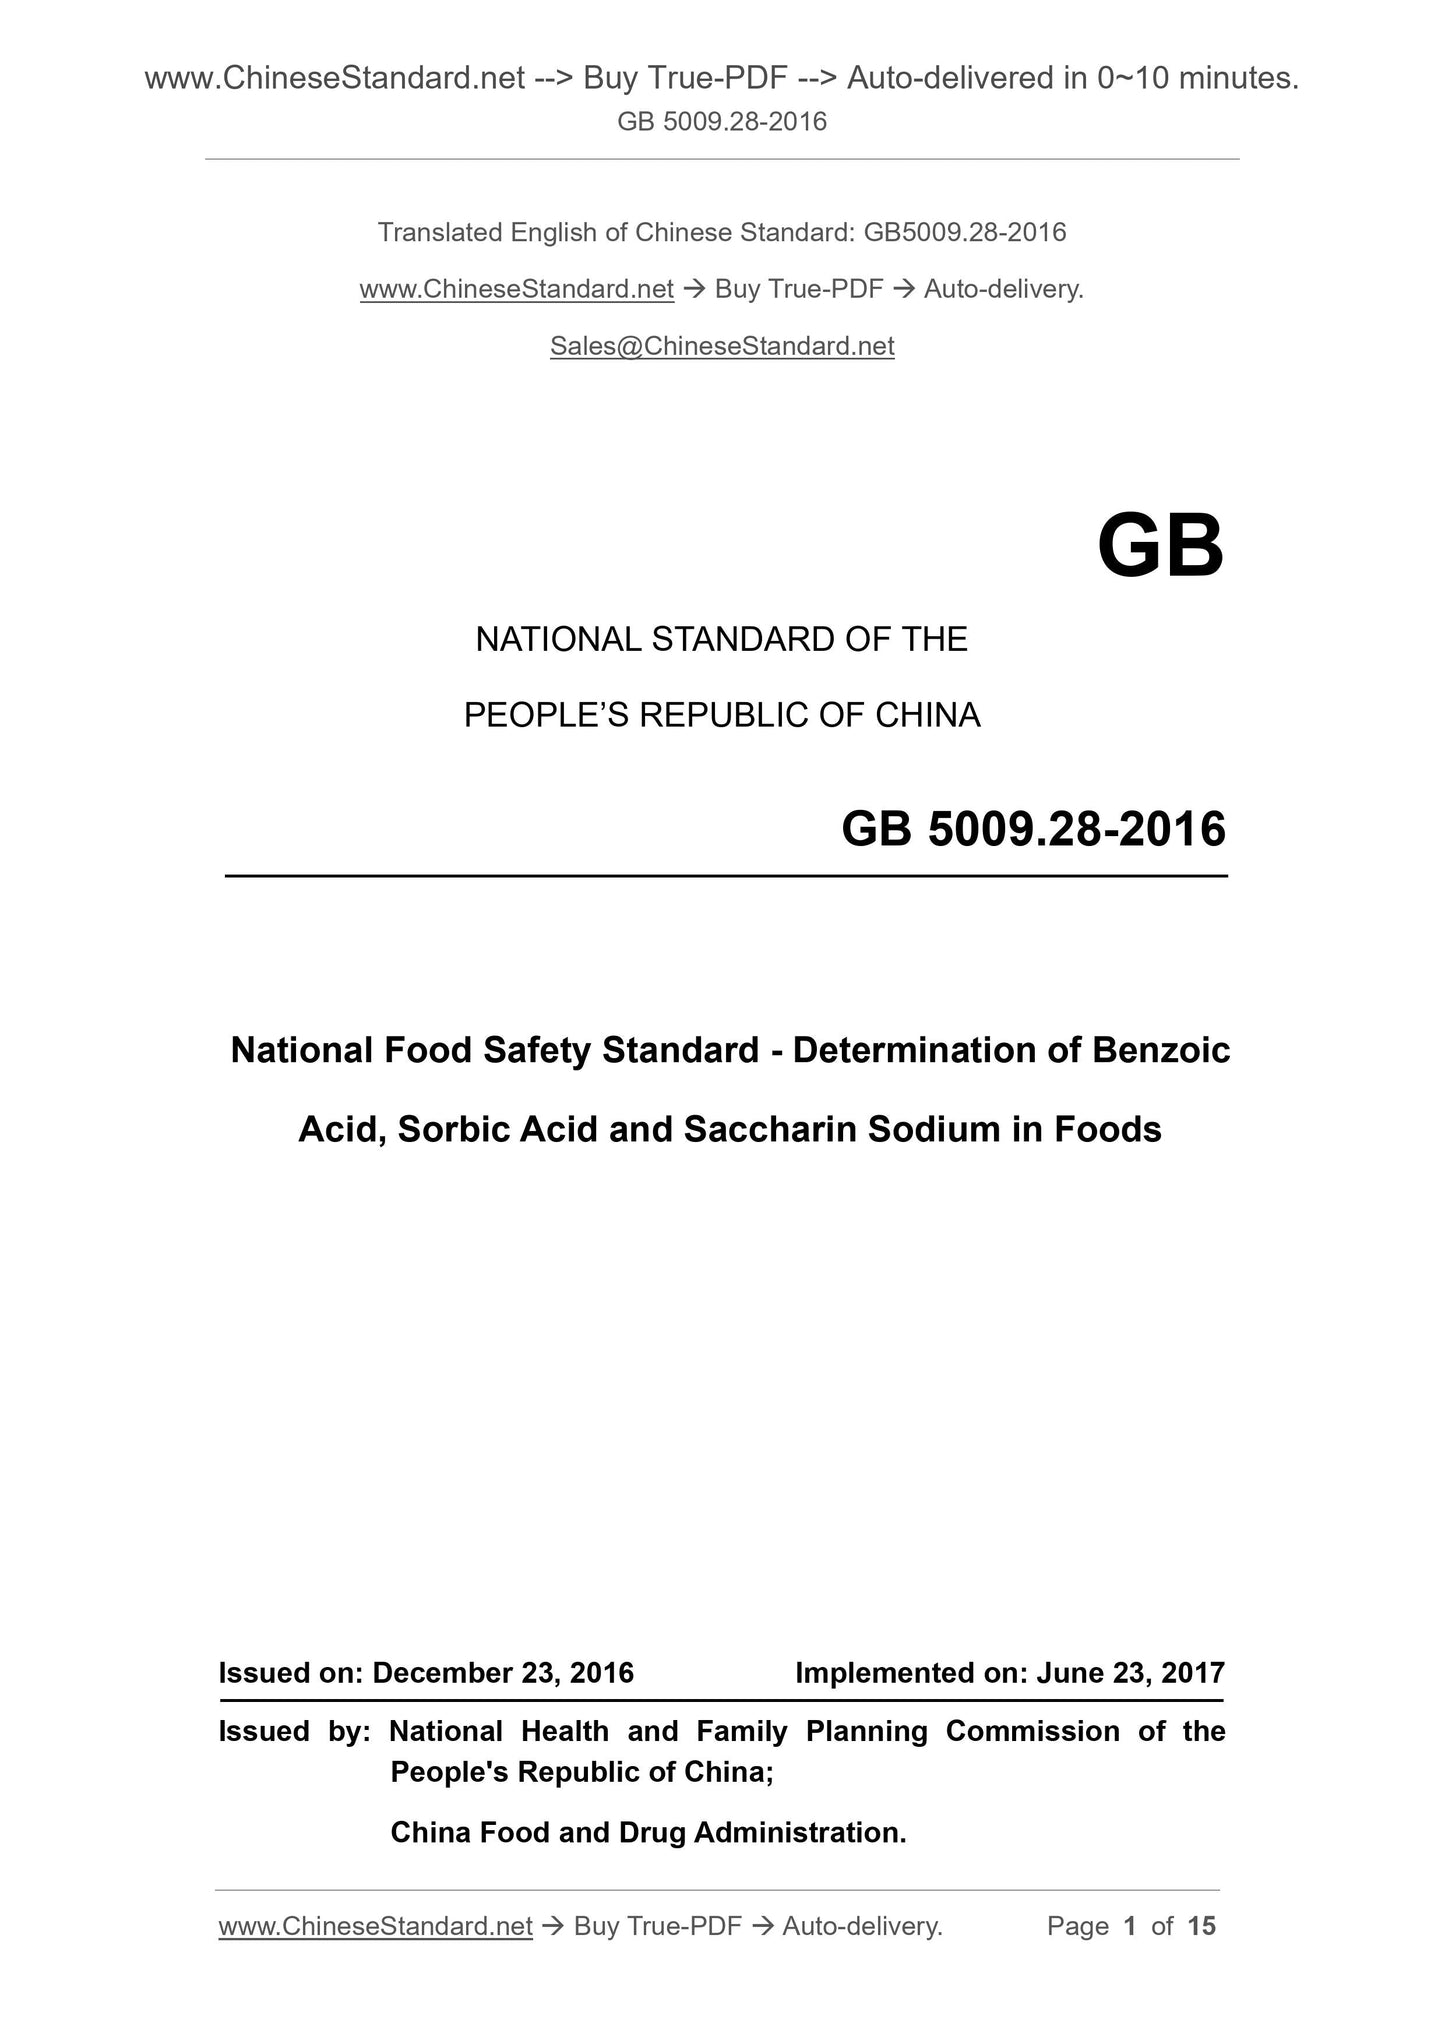 GB 5009.28-2016 Page 1